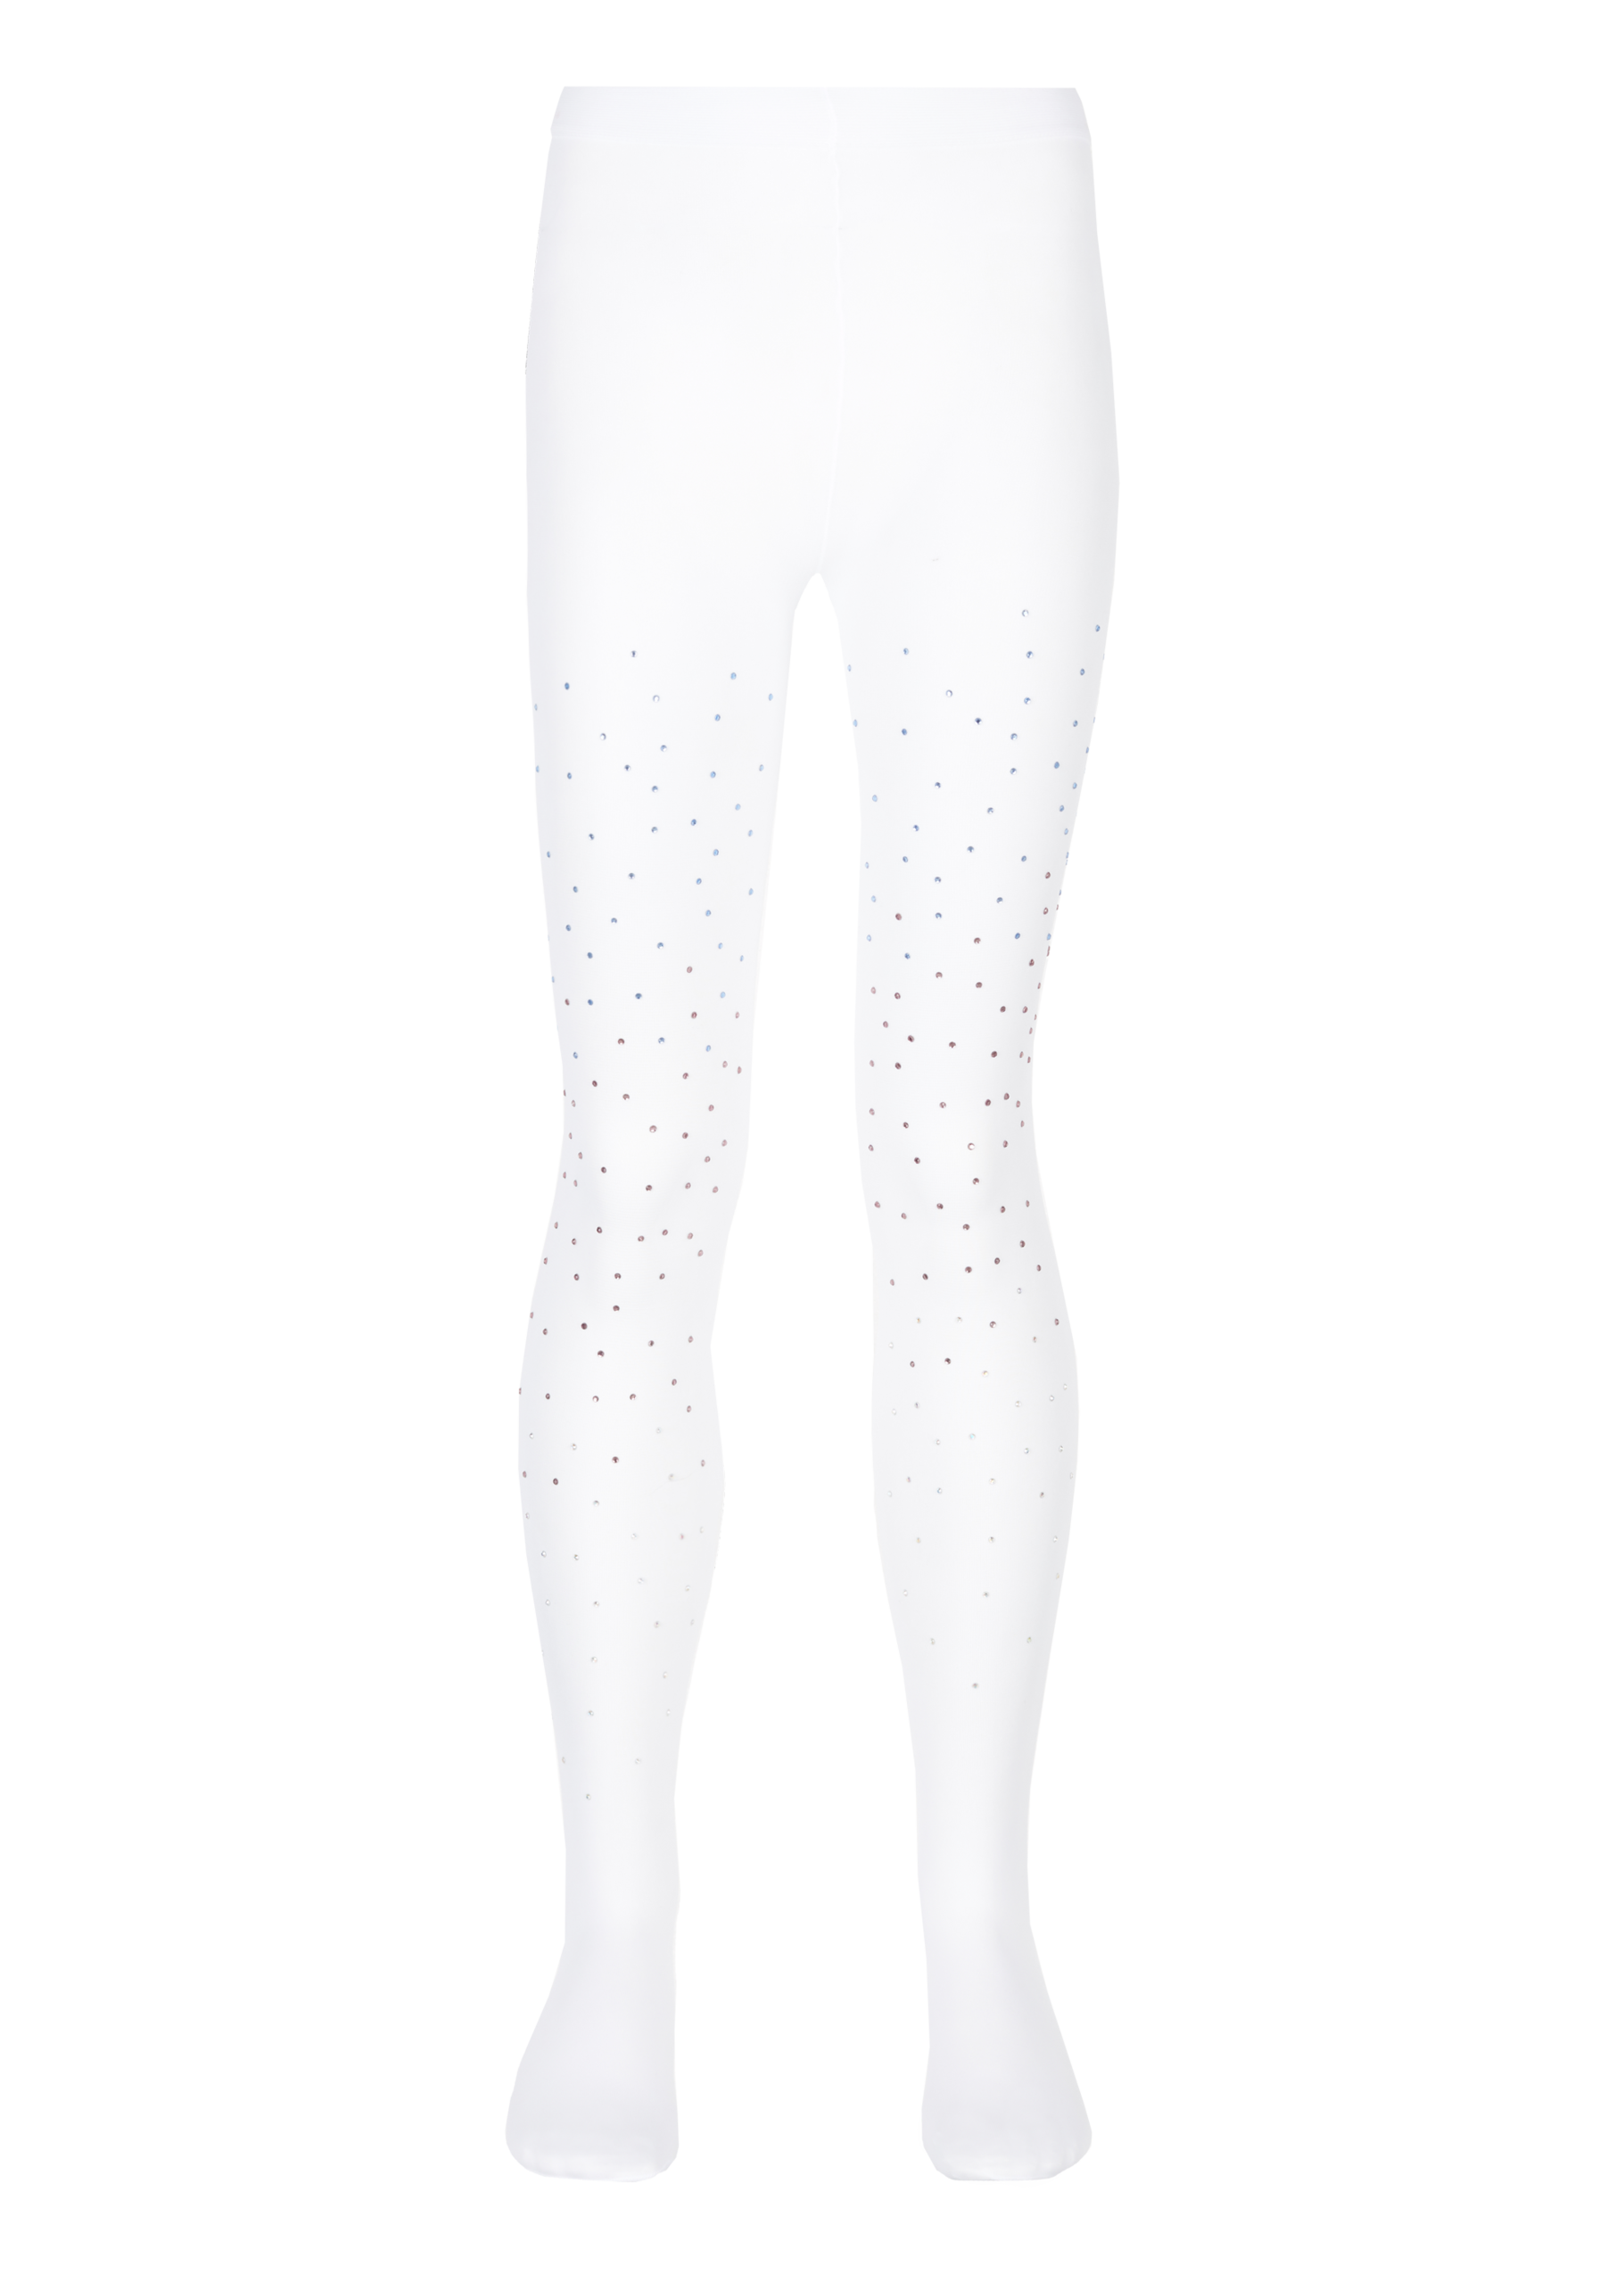 Sheer patterned girls' tights - Calzedonia